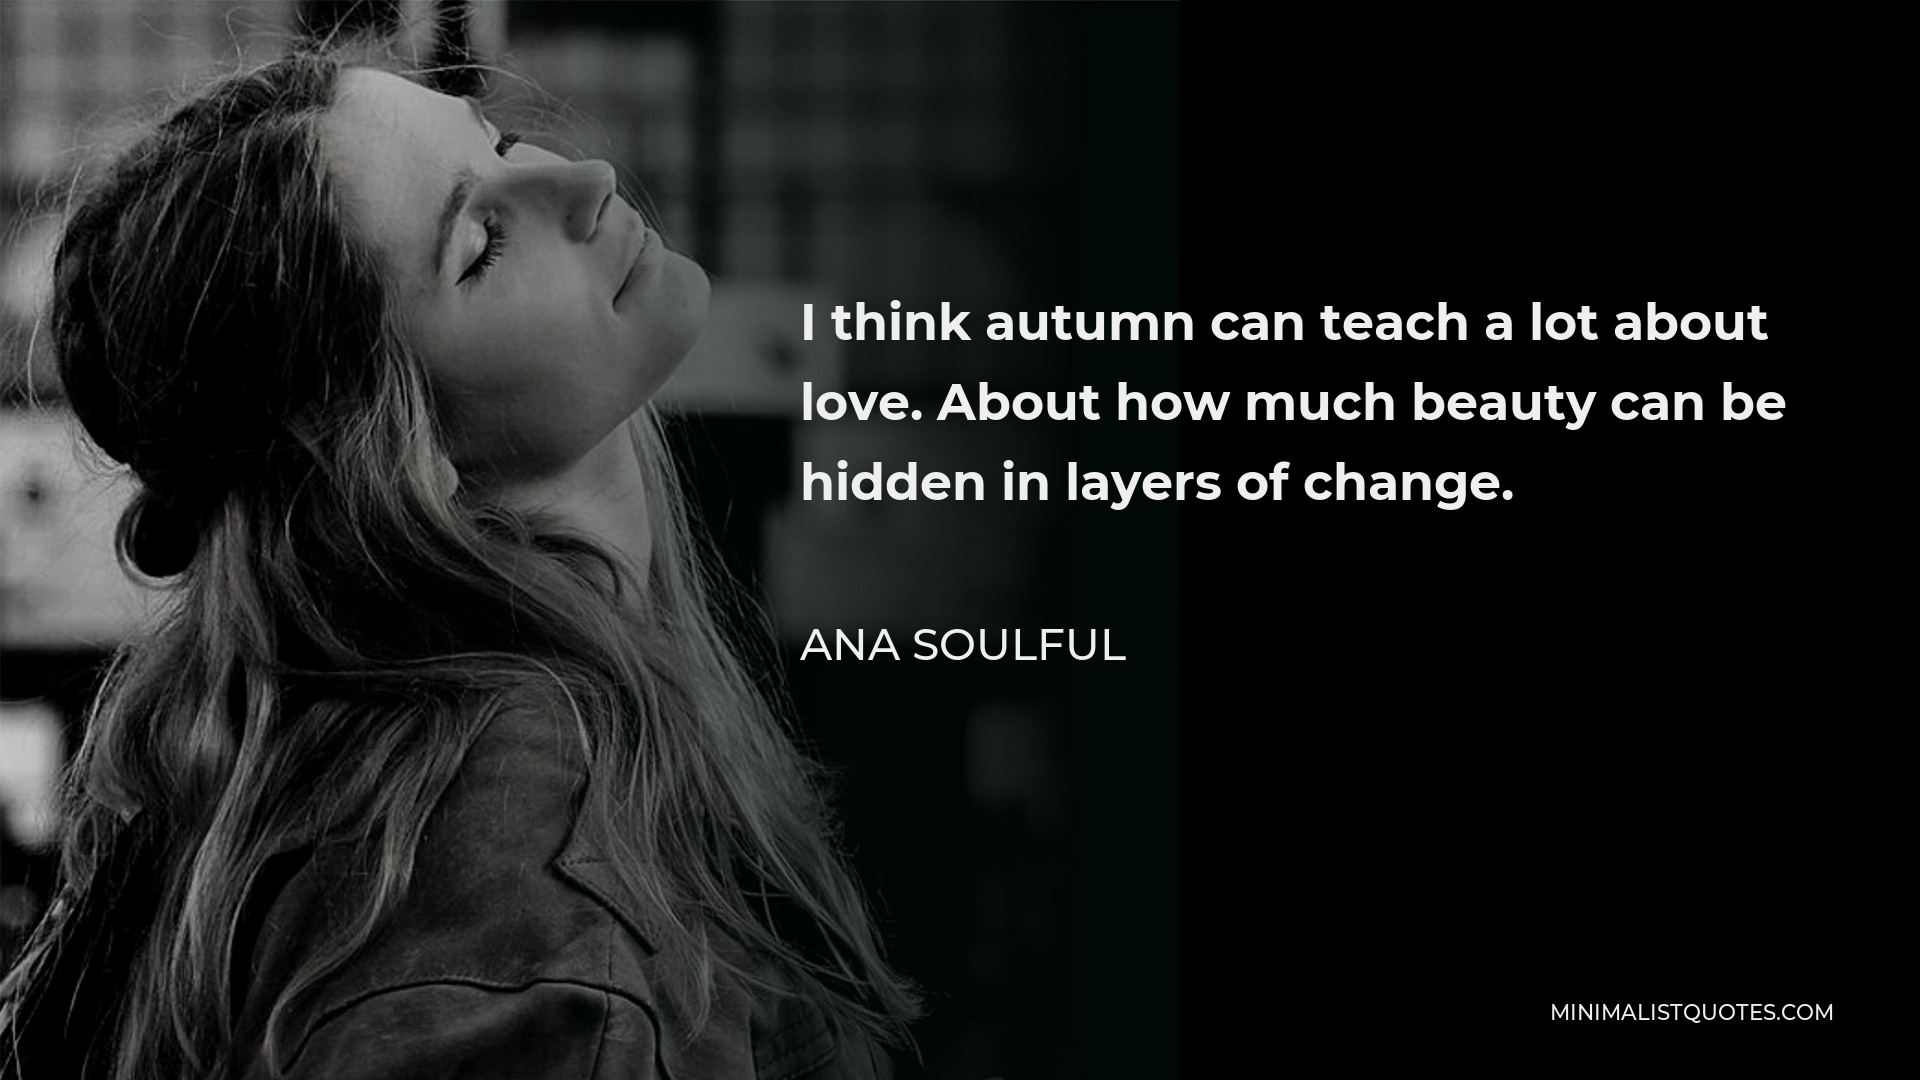 Ana Soulful Quote - I think autumn can teach a lot about love. About how much beauty can be hidden in layers of change.